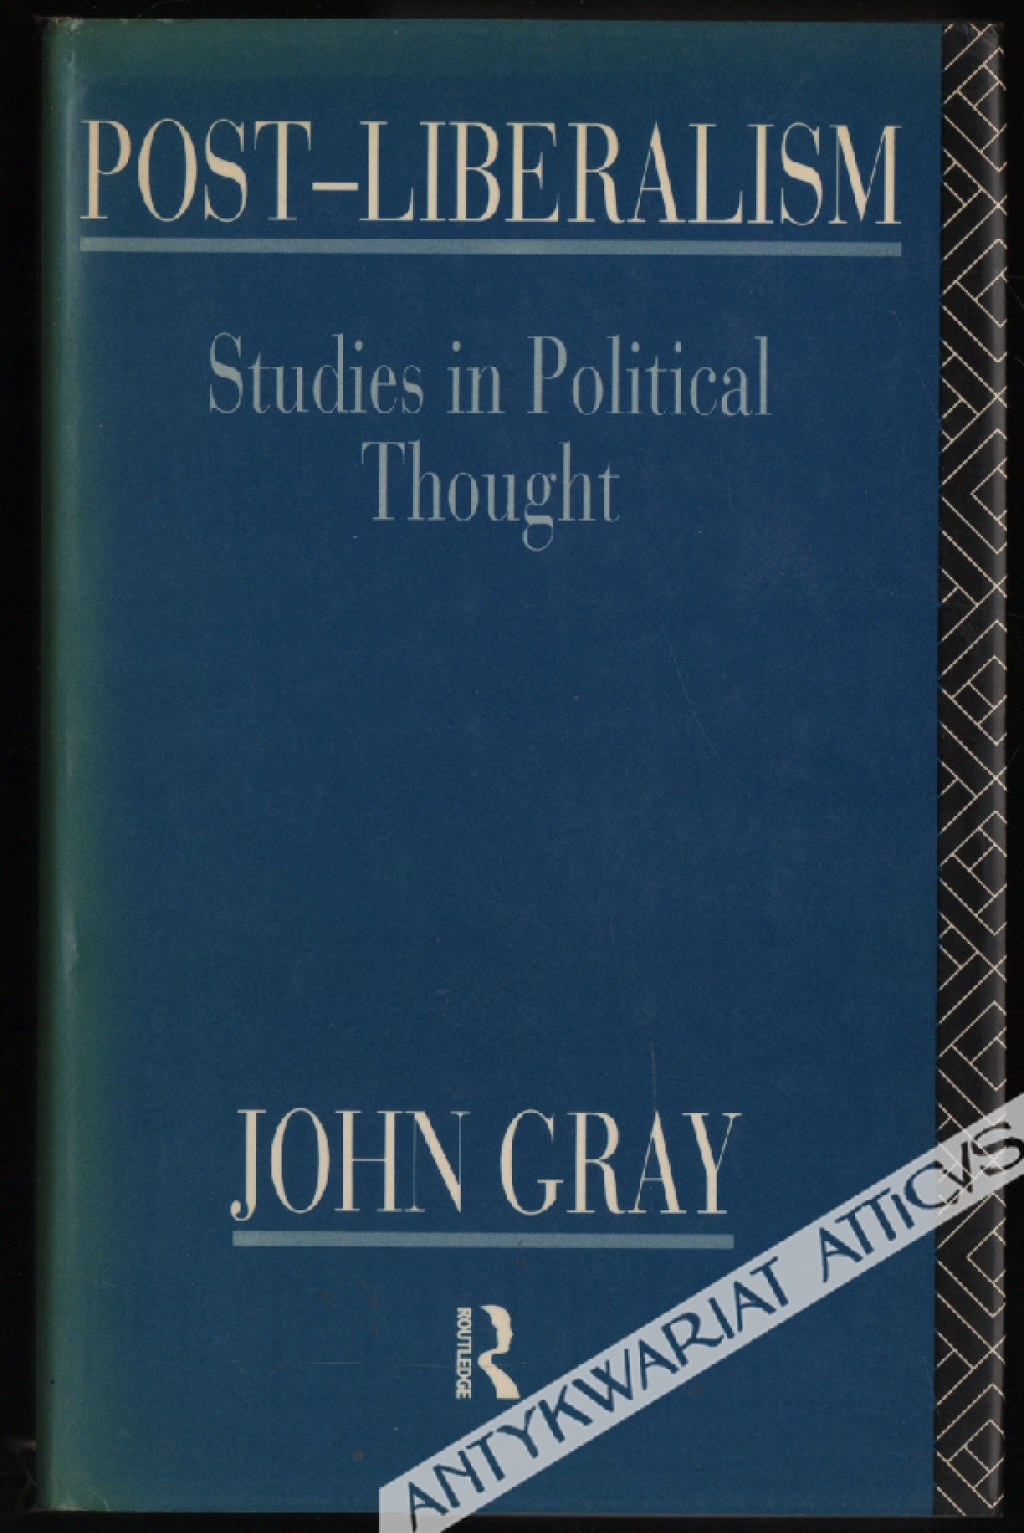 Post-Liberalism. Studies in Political Thought